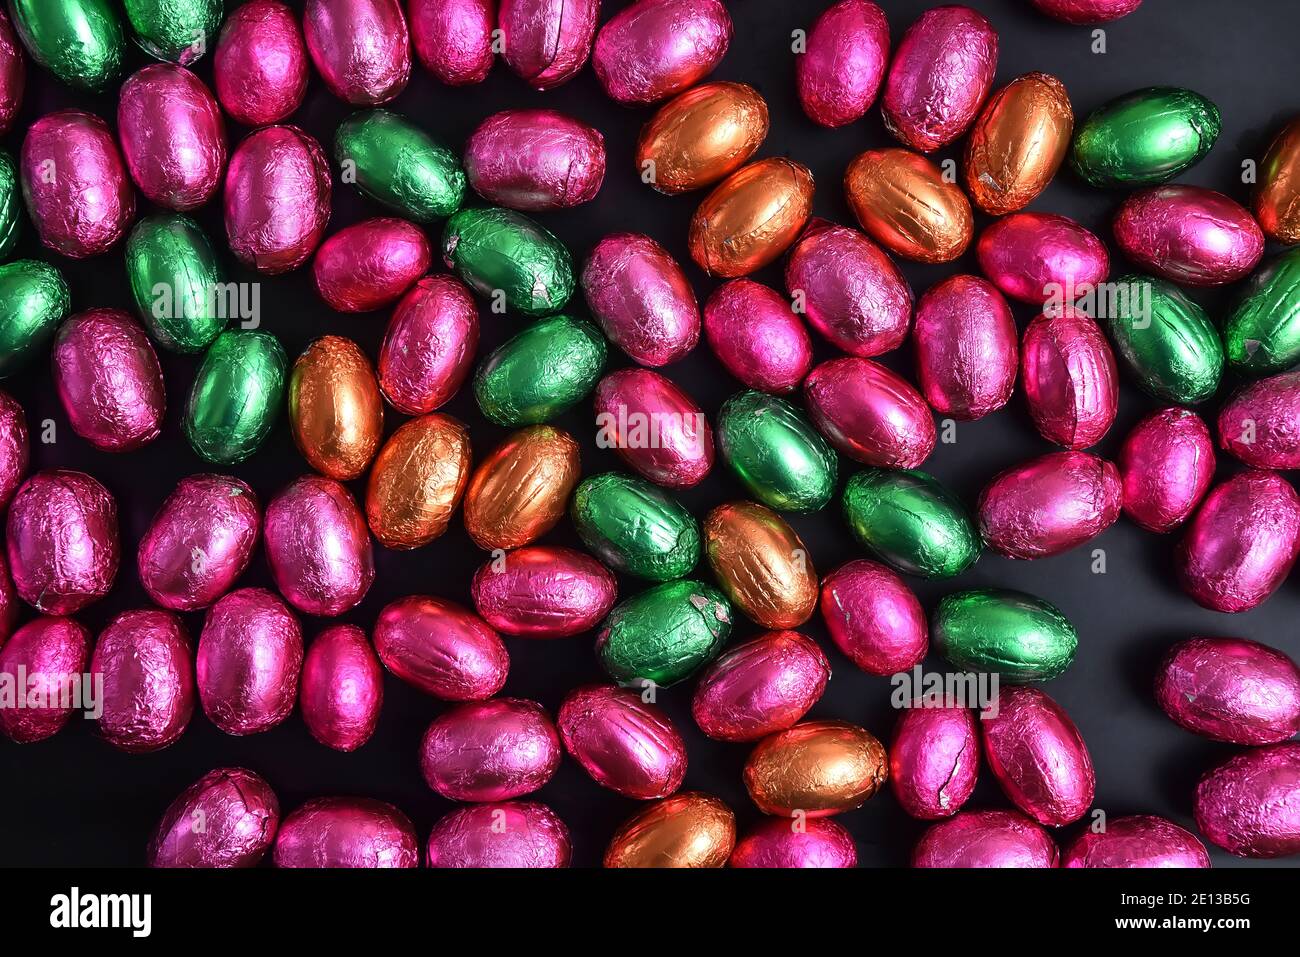 Pink, green, orange and bronze foil wrapped chocolate easter eggs, against a black background. Stock Photo